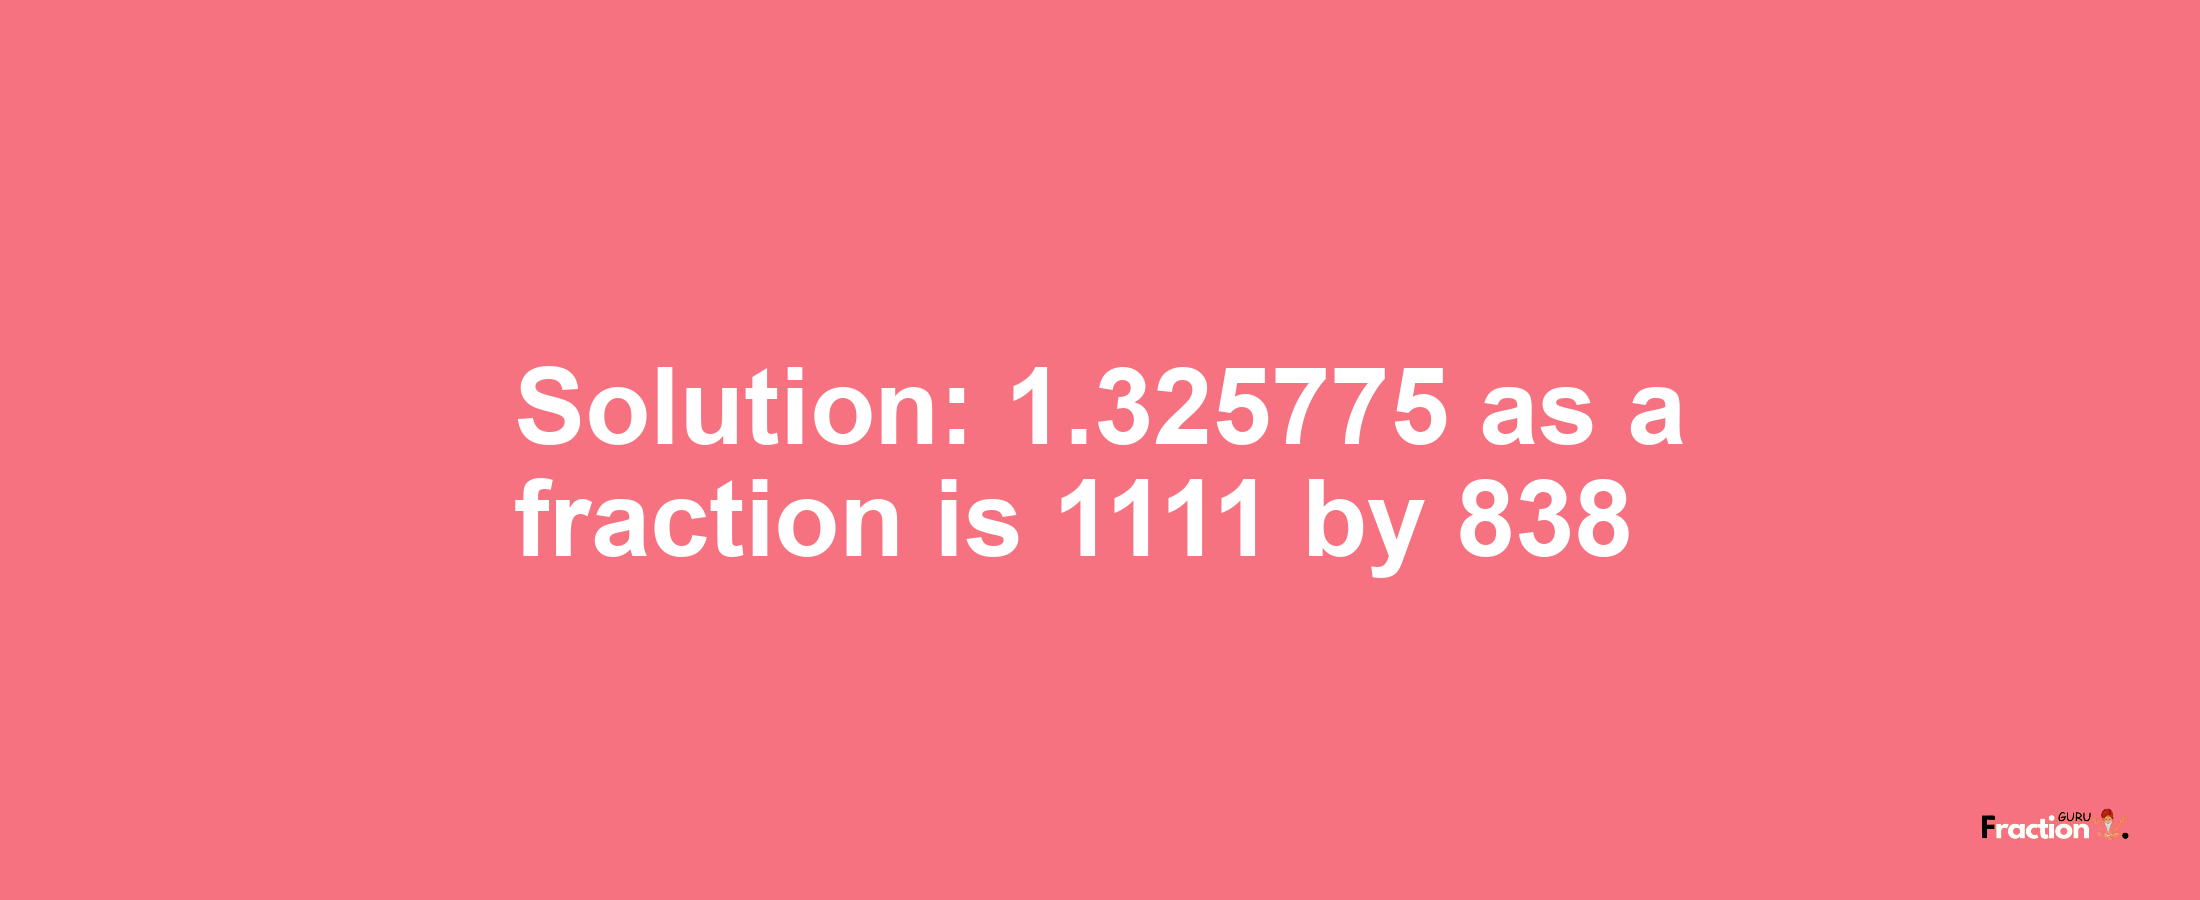 Solution:1.325775 as a fraction is 1111/838